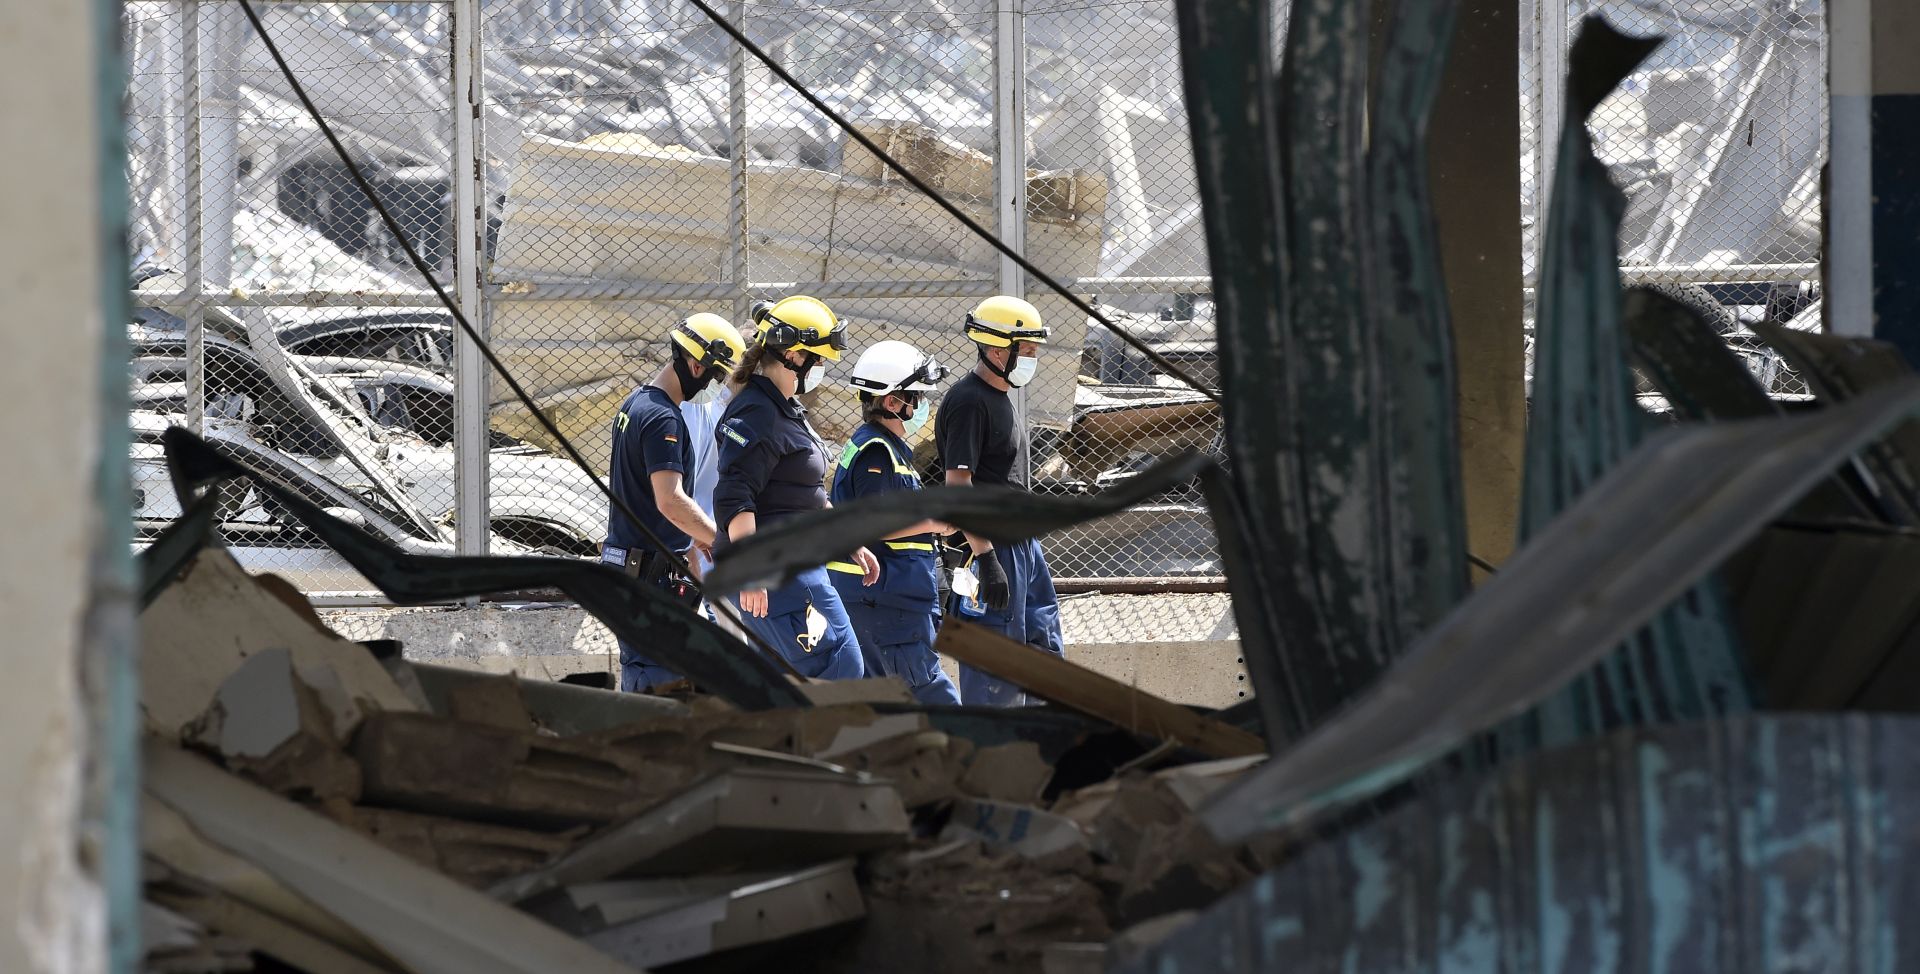 epa08589337 Members of German Federal Agency for Technical Relief (THW) search for bodies and survivors amid the rubble three days after explosions that hit Beirut port, in Beirut, Lebanon, 07 August 2020. According to the Lebanese Health Ministry, at least 137 people were killed, and more than 5,000 injured in the blast believed to have been caused by an estimated 2,750 tons of ammonium nitrate stored in a warehouse. The explosion and its shockwave on 04 August 2020 devastated the port area.  EPA/WAEL HAMZEH